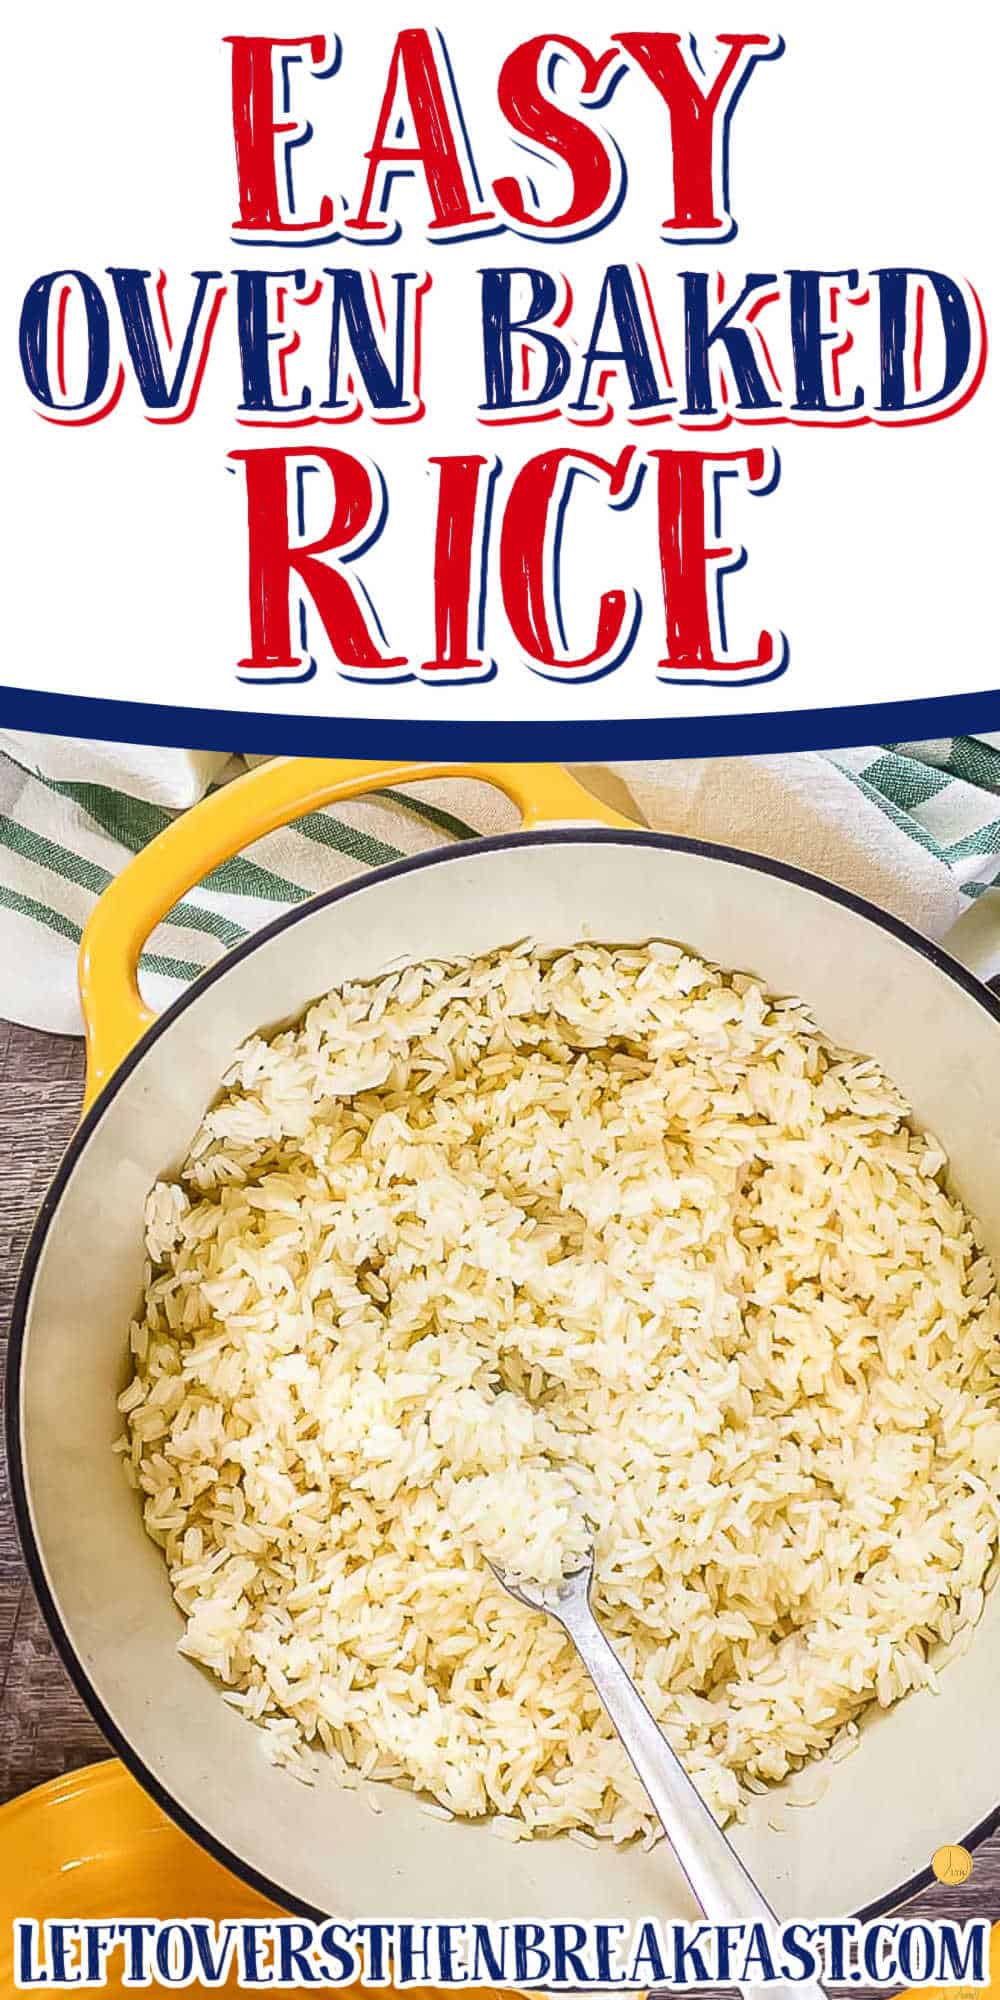 Pinterest image for baked rice with text "easy baked rice - perfectly fluffy"